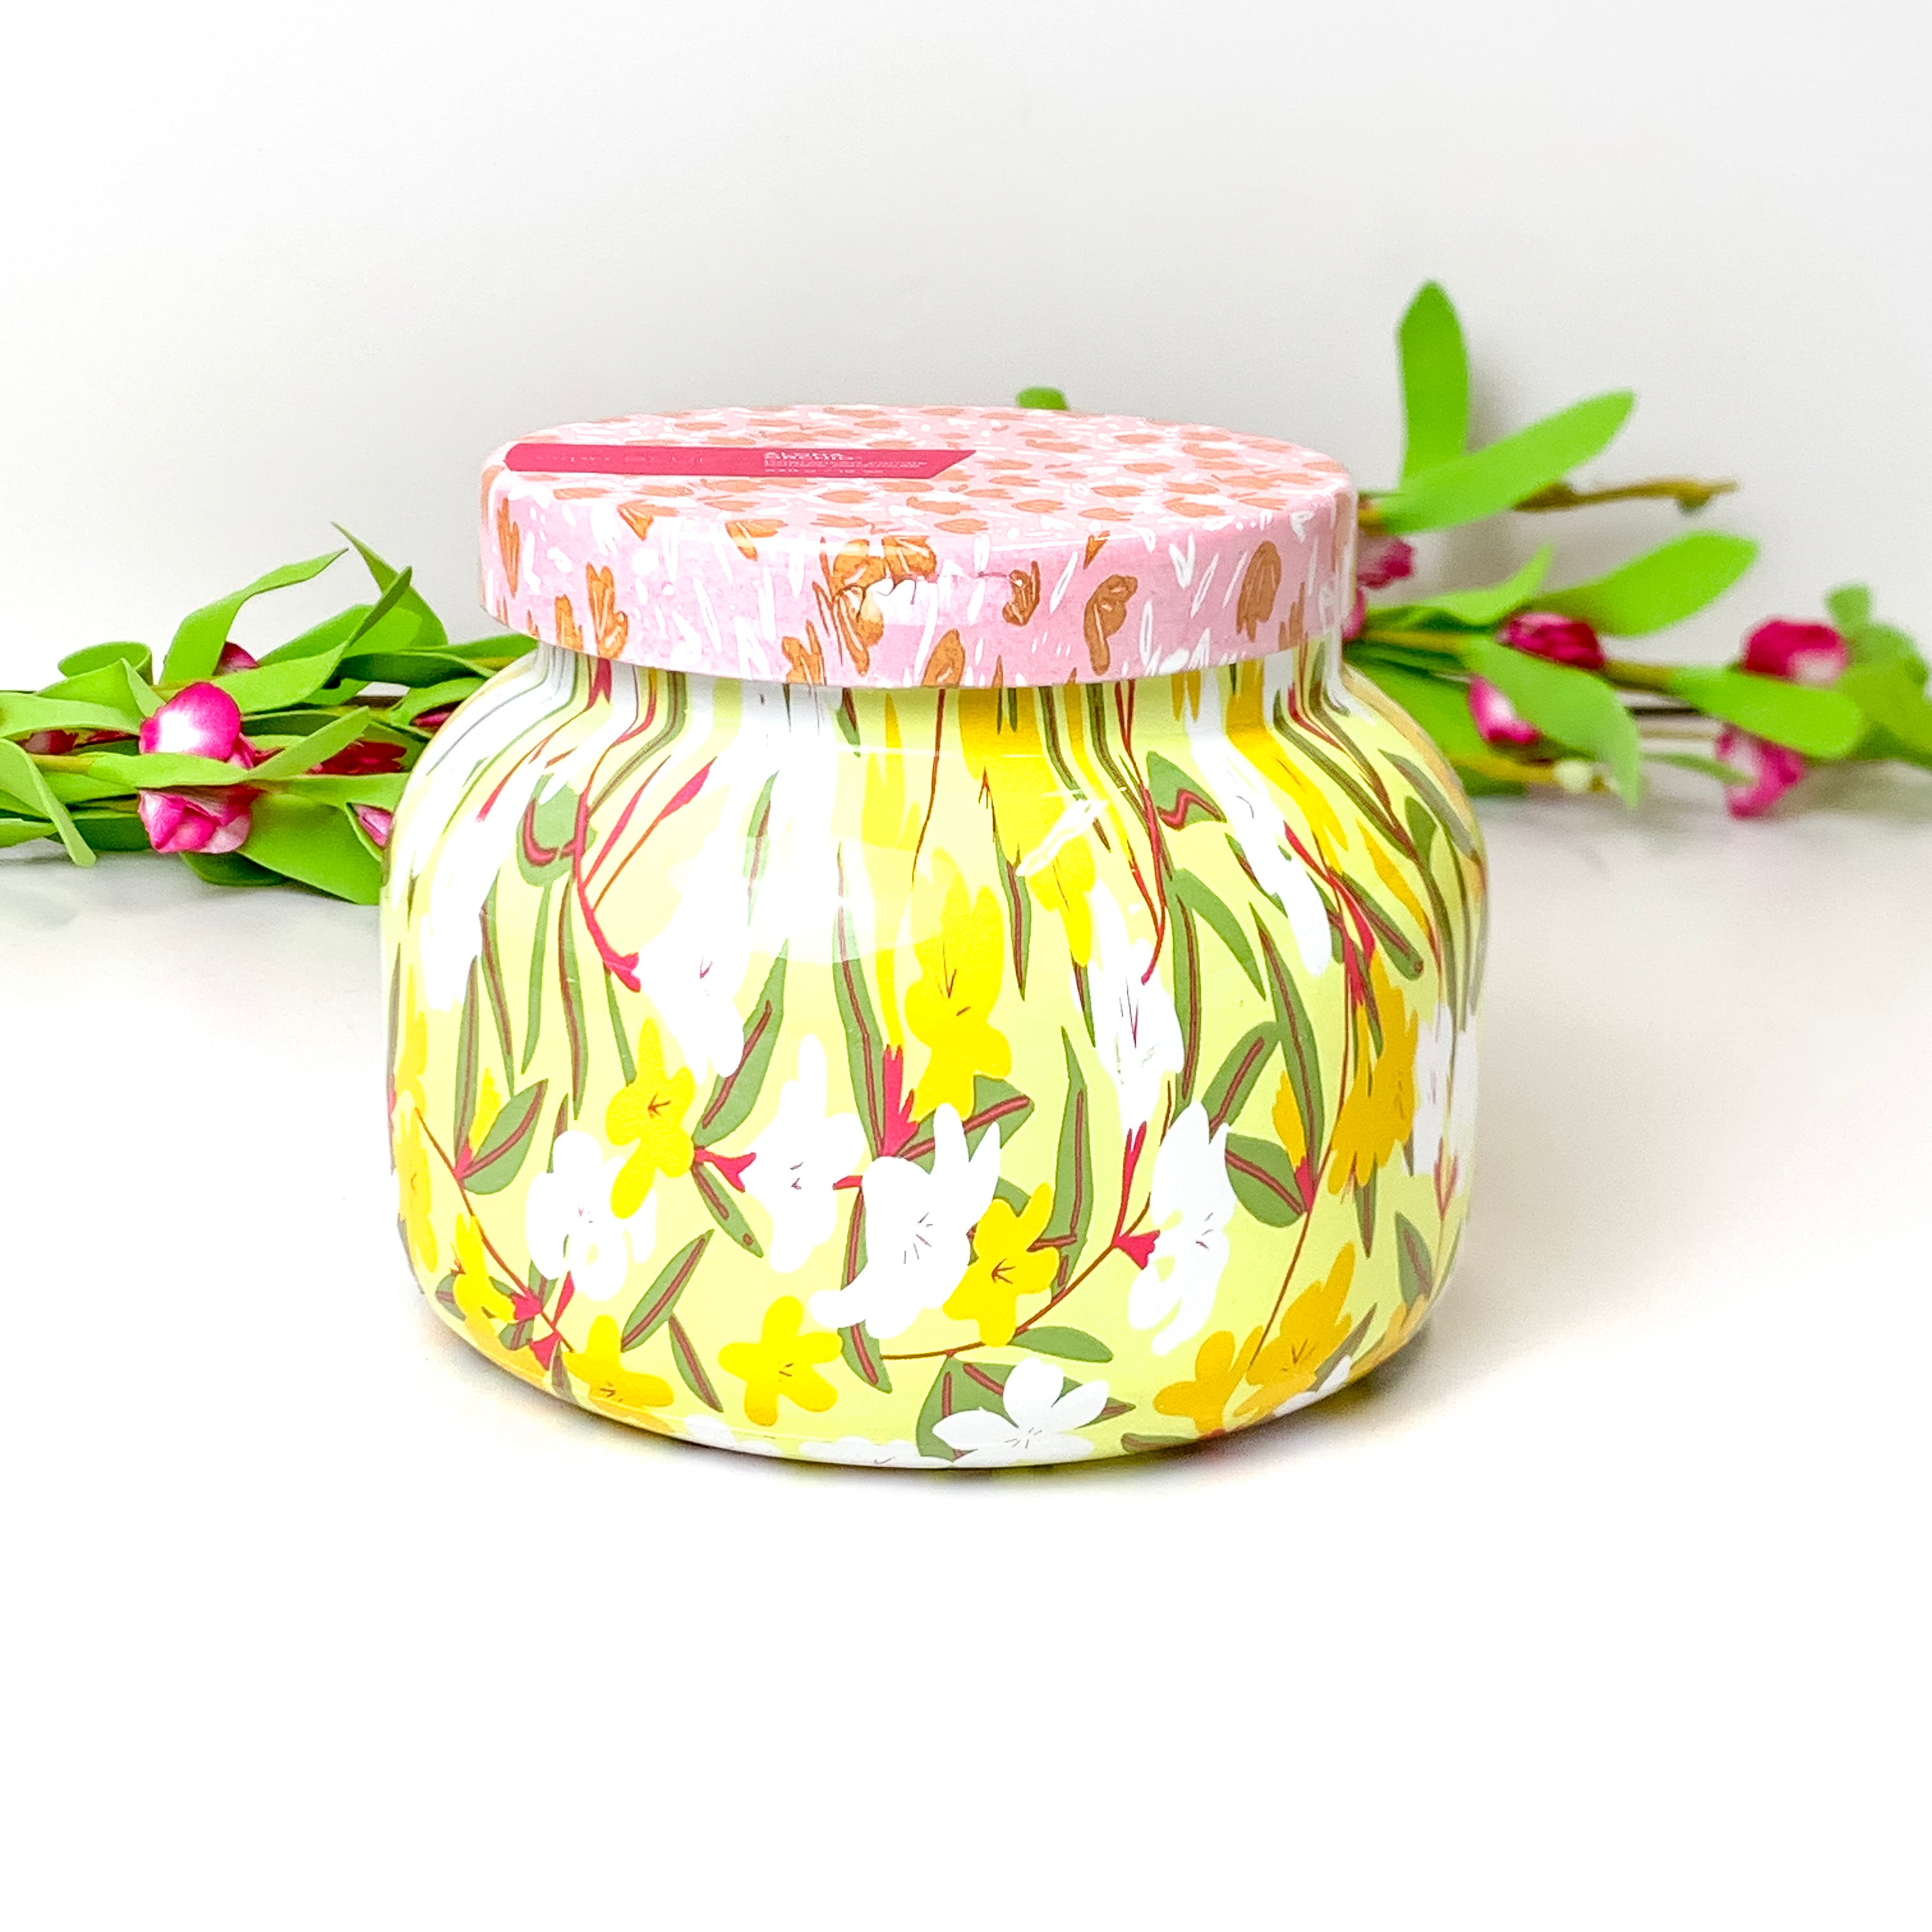 Capri Blue | 19 oz. Jar Candle in Pattern Play | Aloha Orchid - Giddy Up Glamour Boutique